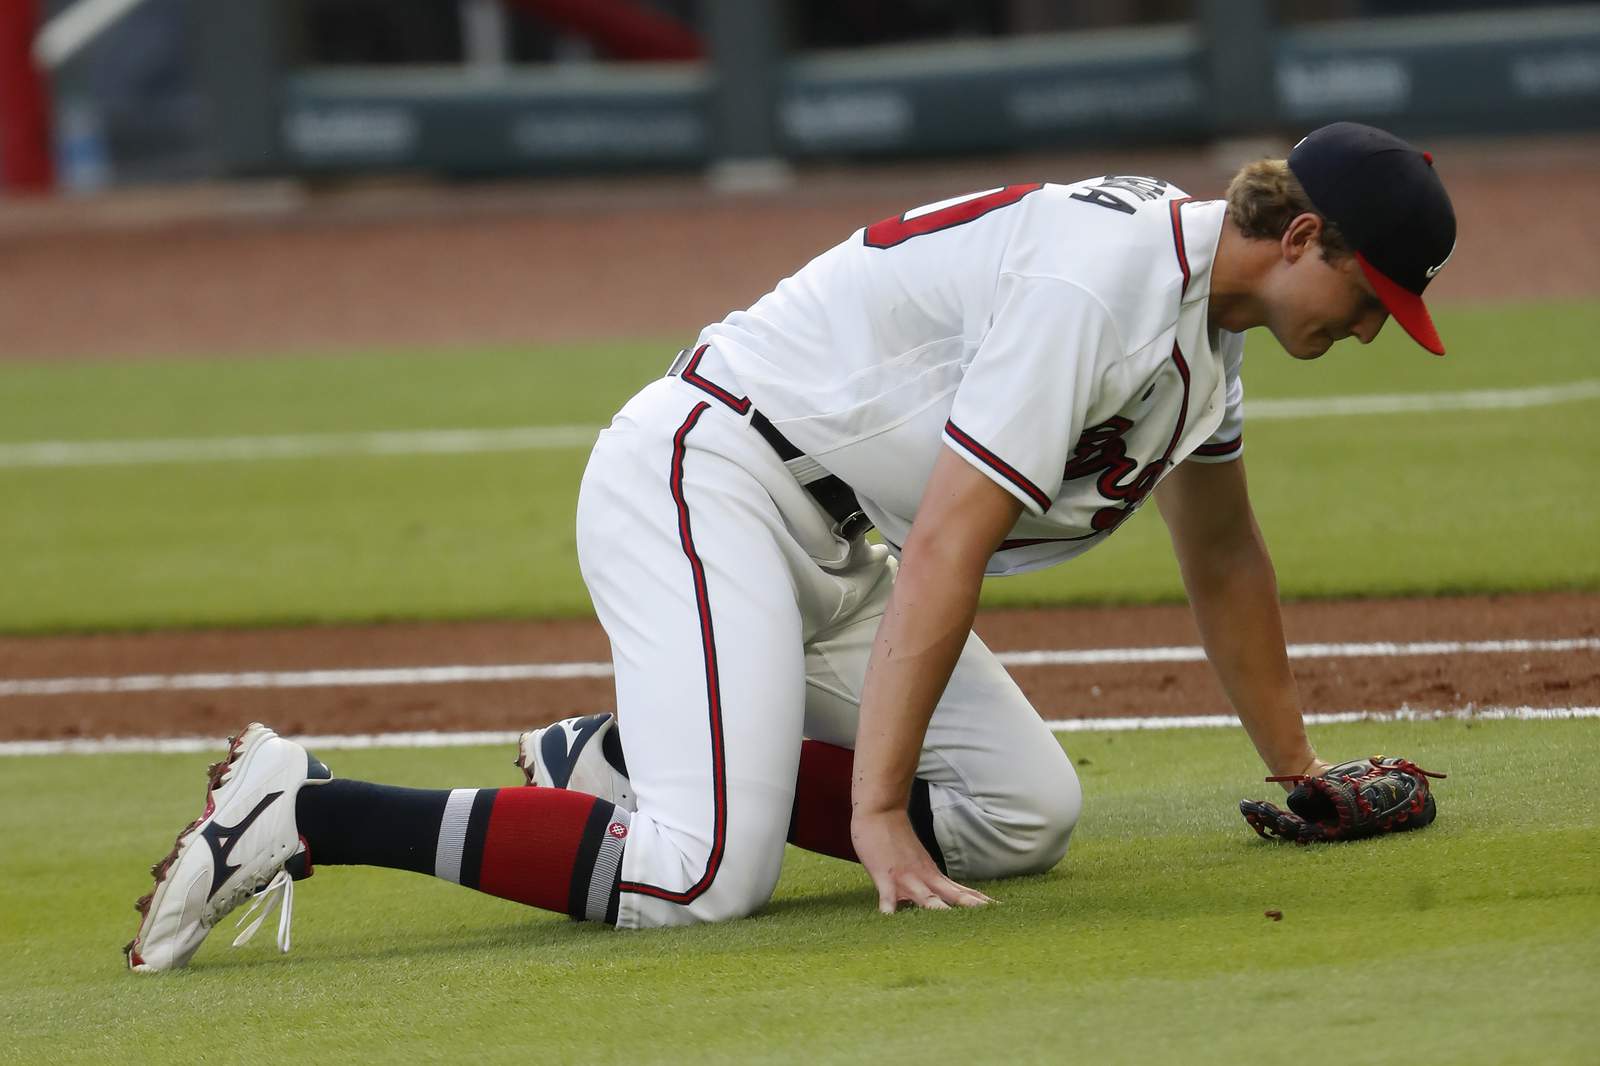 Done for the year: Braves ace Soroka felled by torn Achilles